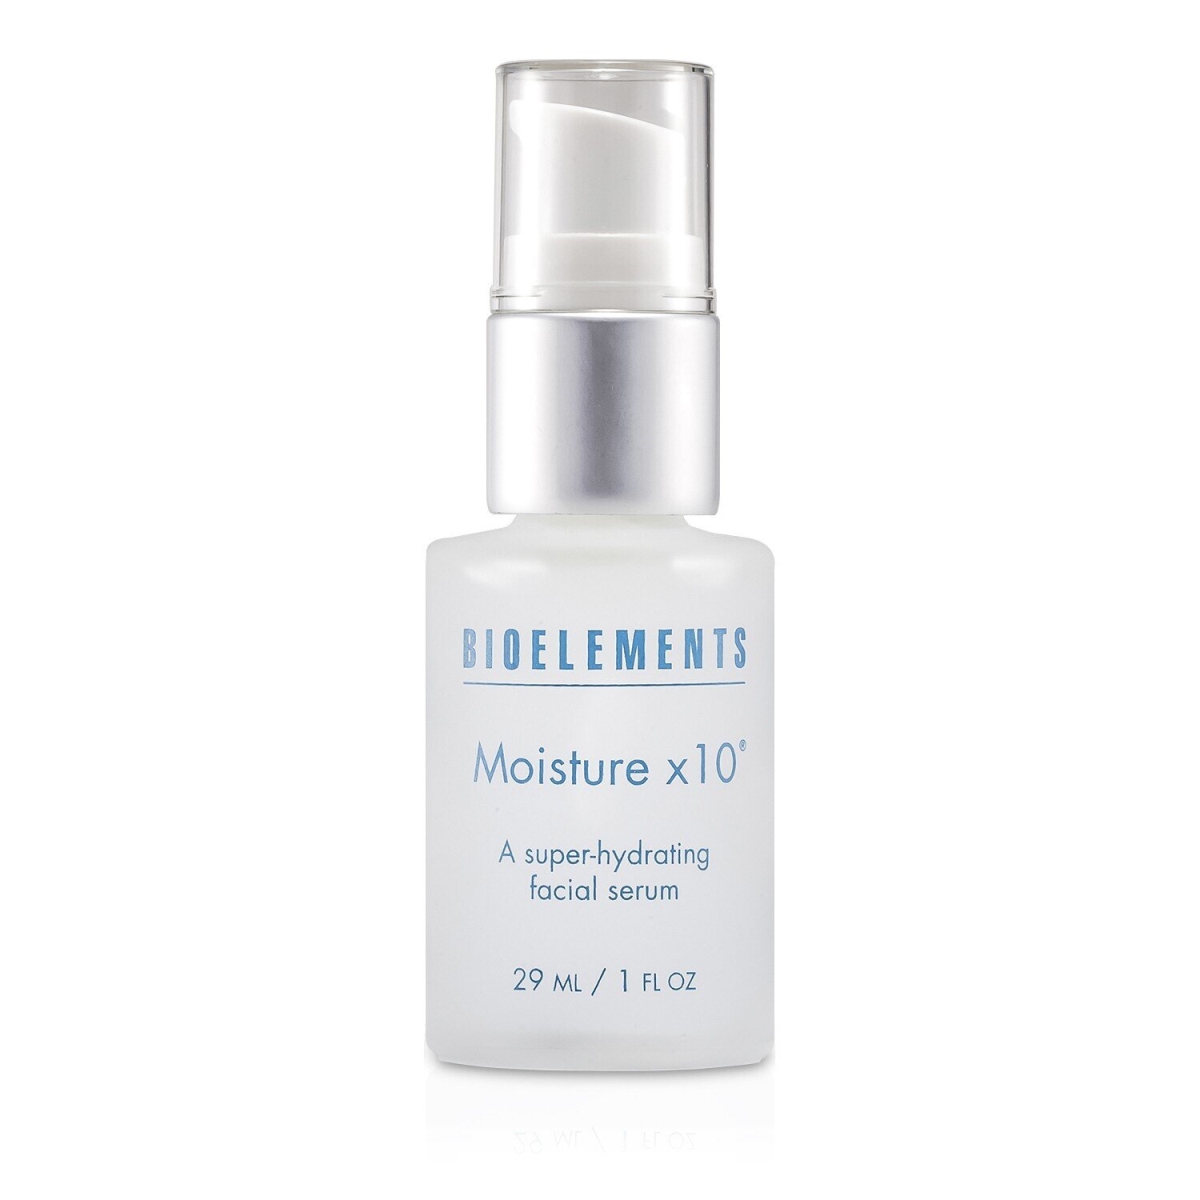 Picture of Bioelements 163857 1 oz Moisture x10 for Dry, Combination Skin Type